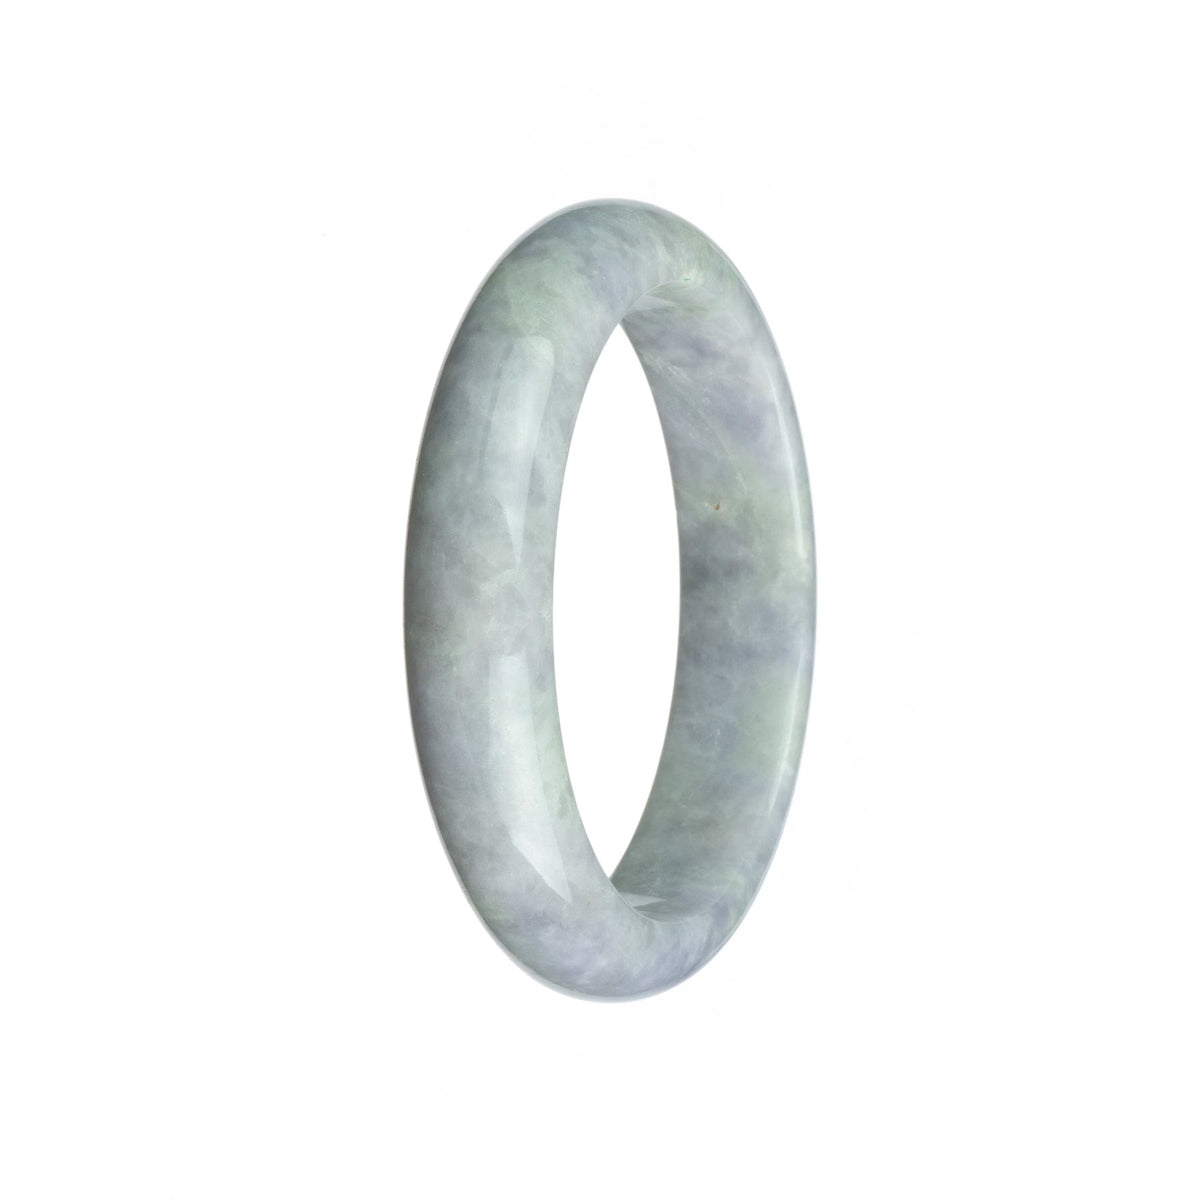 A close-up image of a stunning lavender jade bracelet, showcasing its flawless half moon shape and rich, genuine Type A jade. The bracelet measures 58mm in diameter and is a luxurious addition to any jewelry collection.